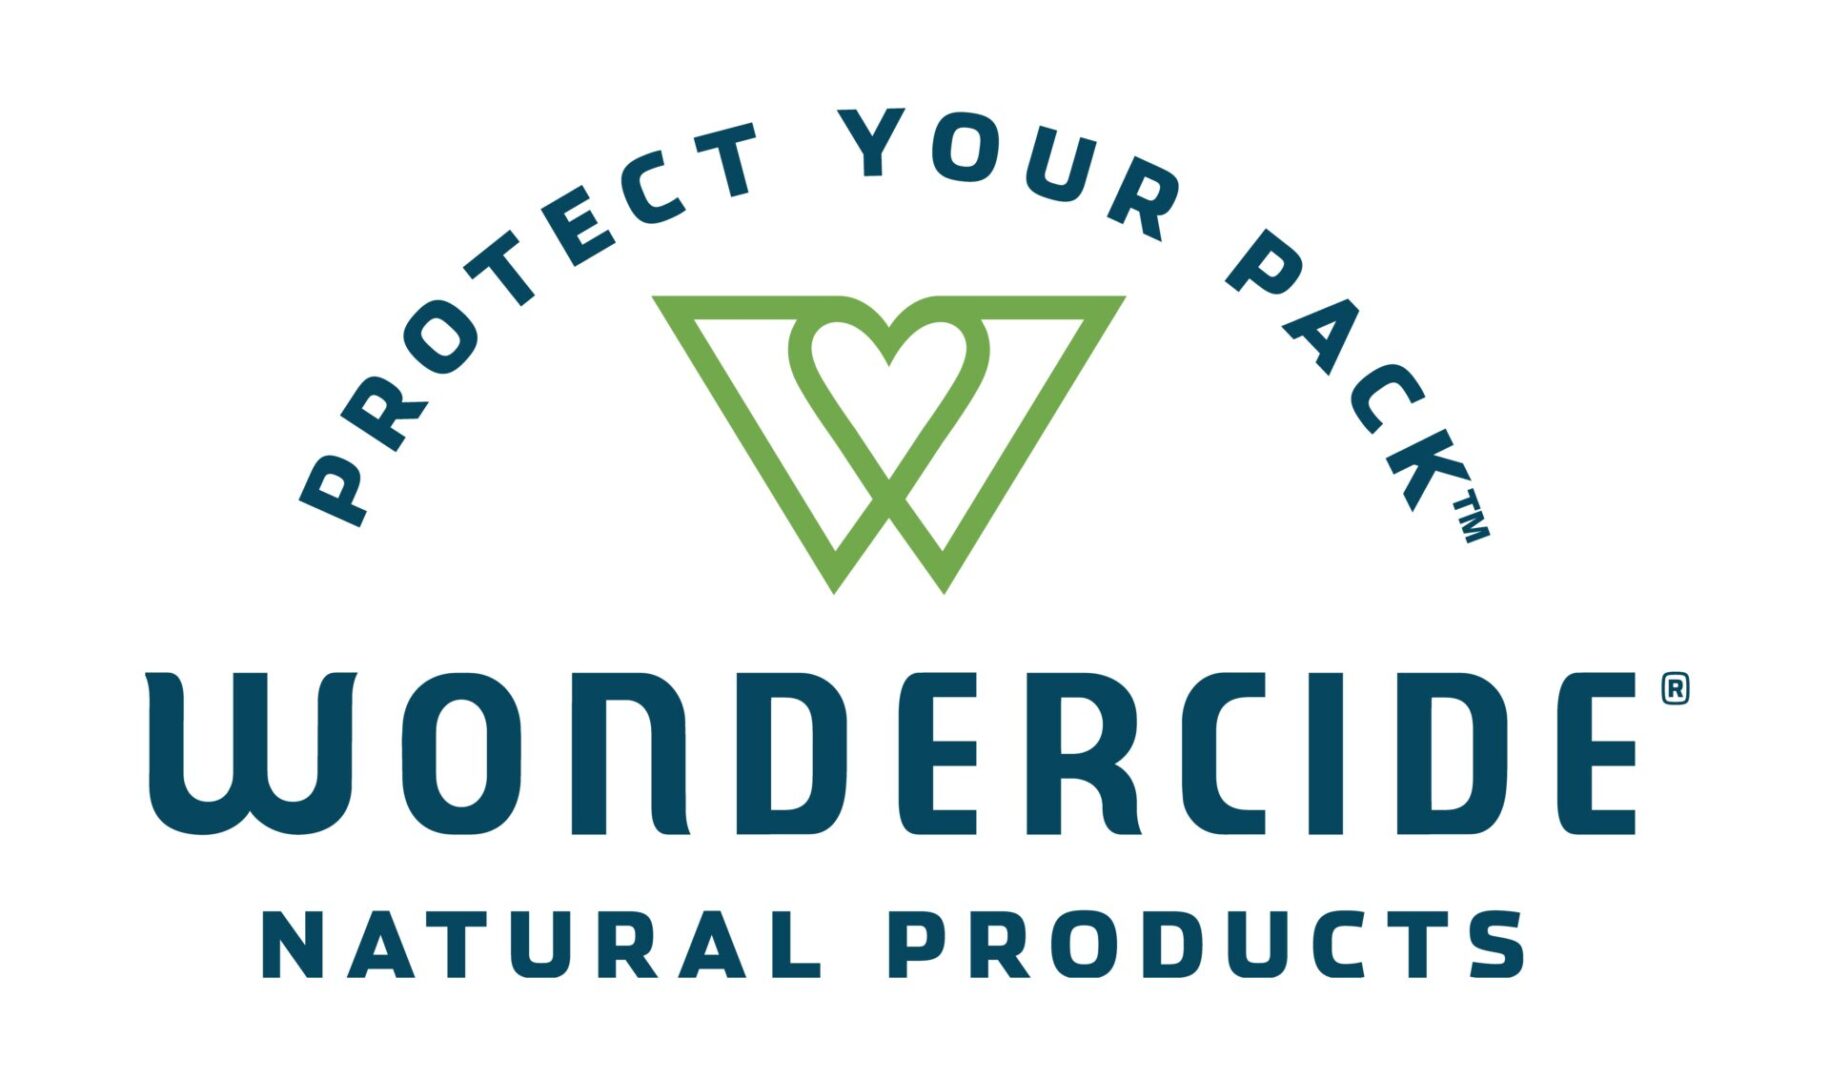 A logo for wondercide natural products.